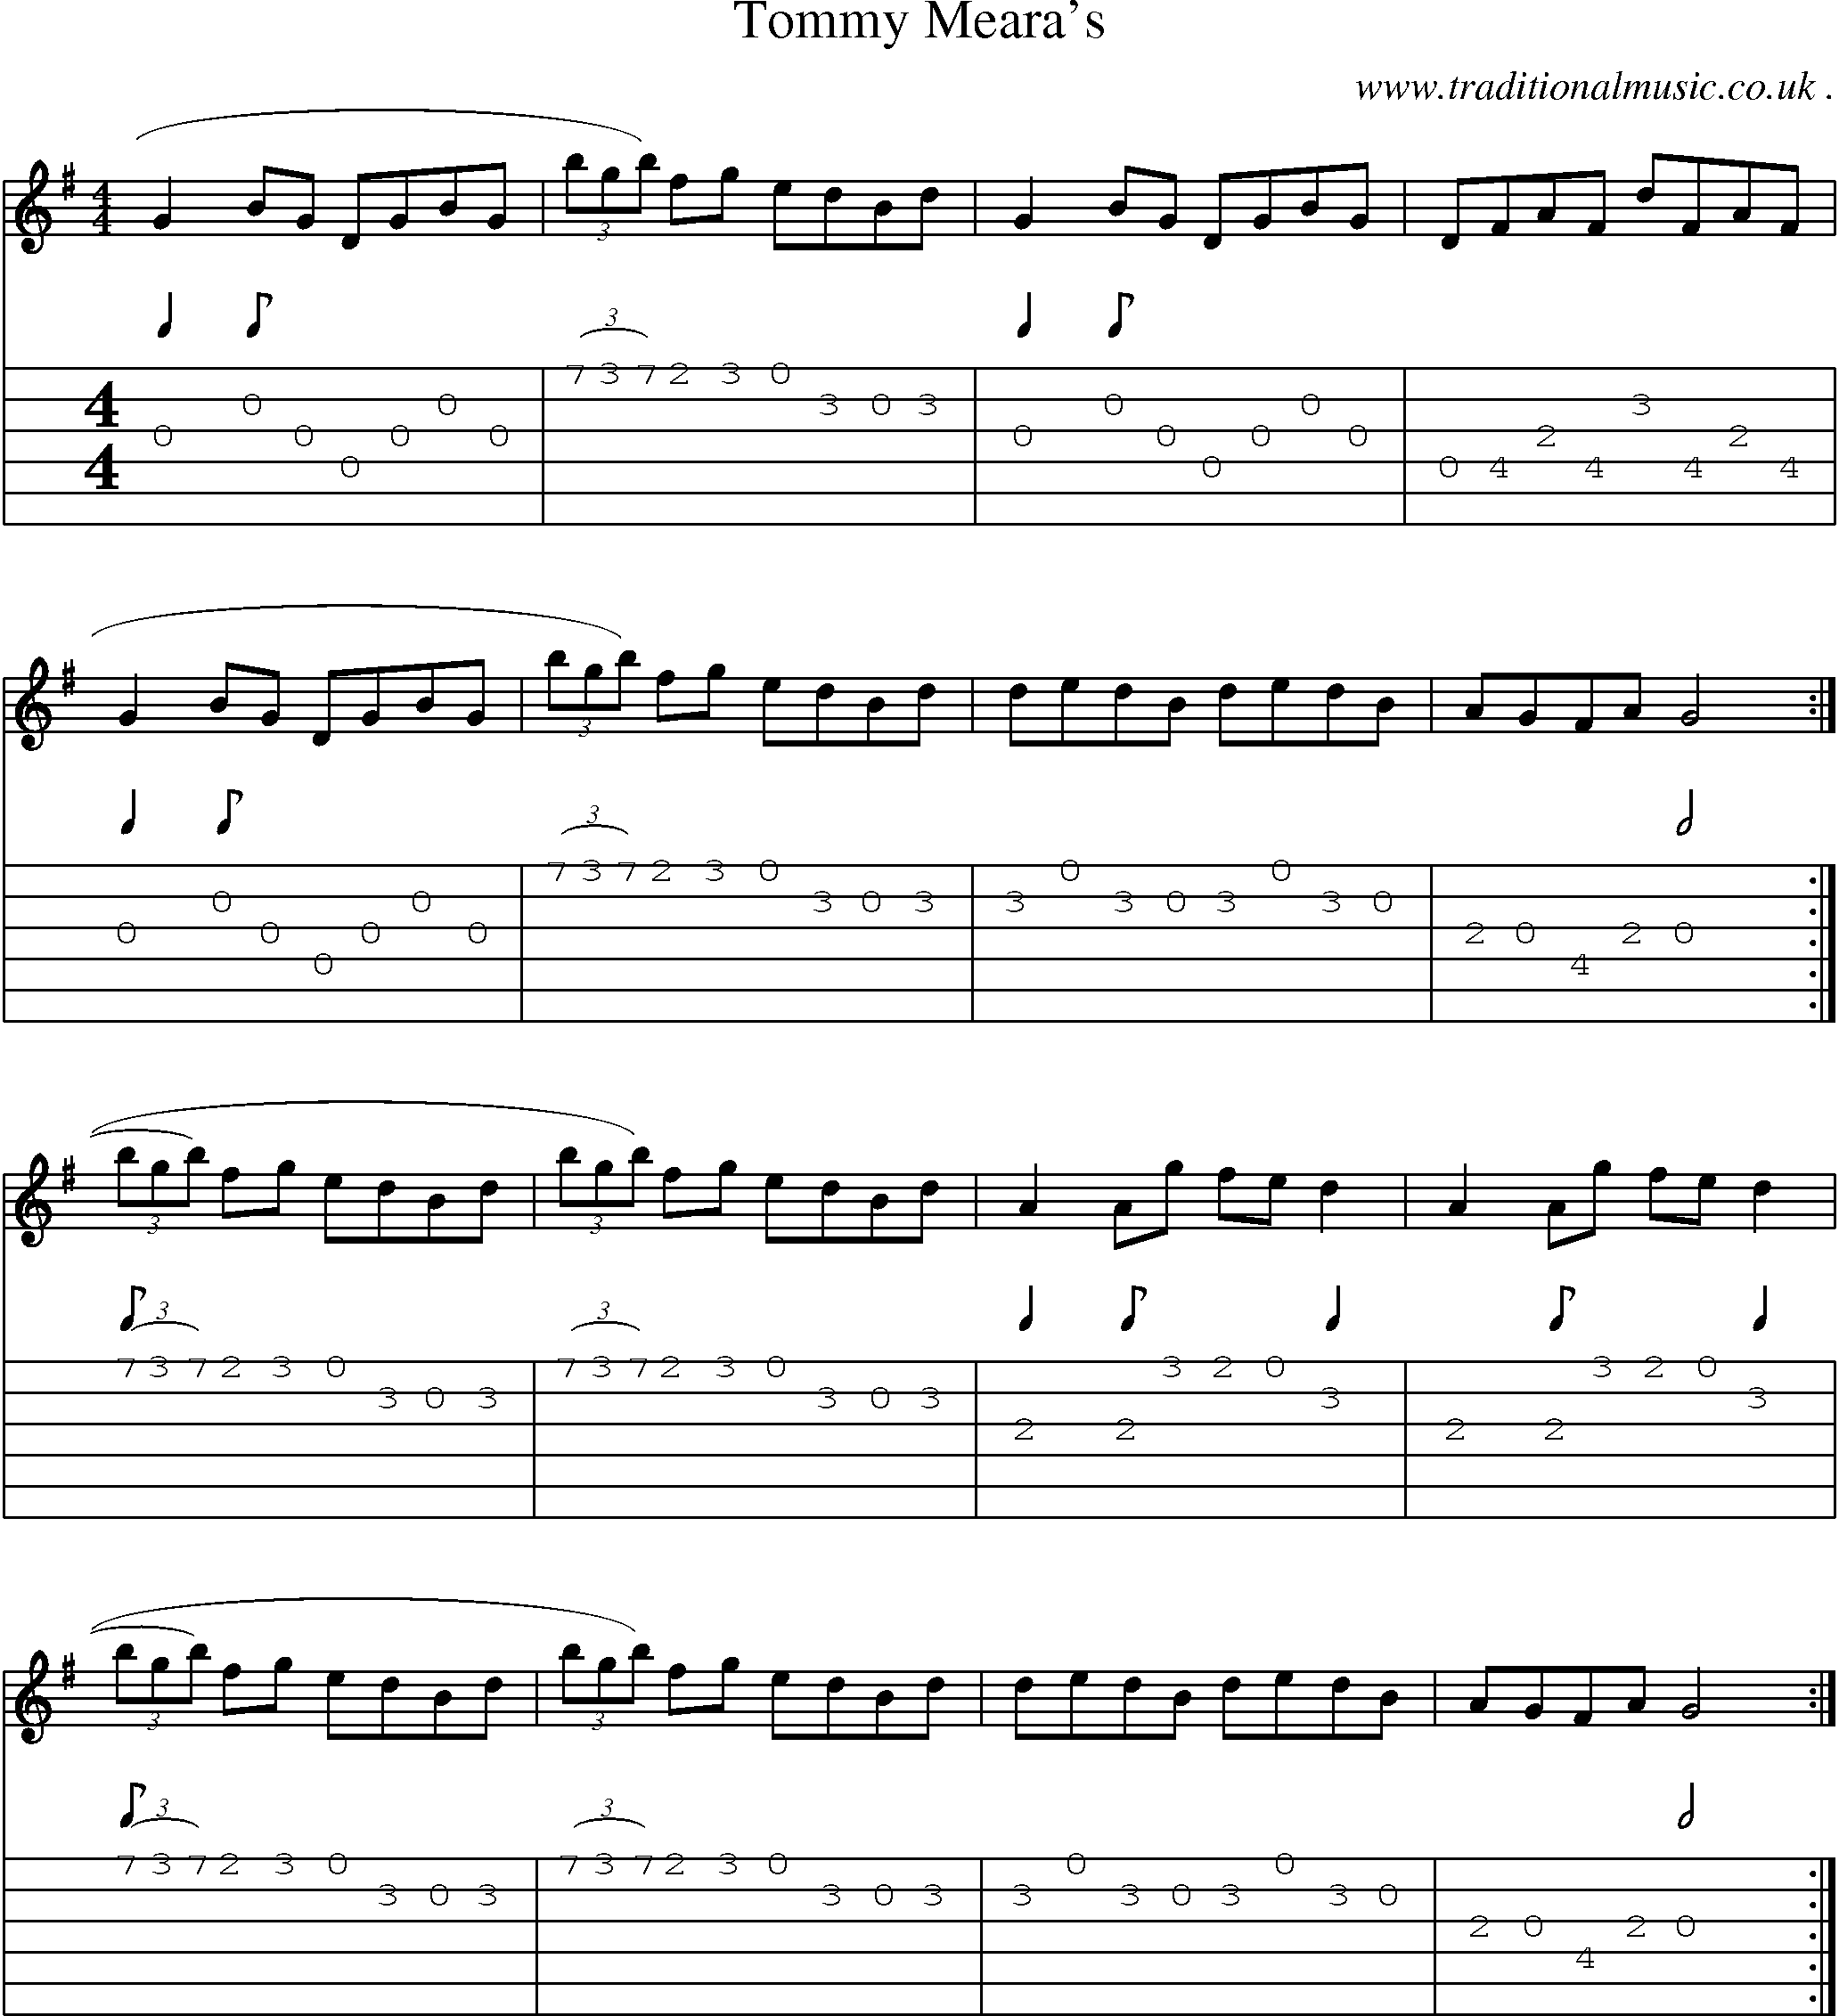 Sheet-Music and Guitar Tabs for Tommy Mearas